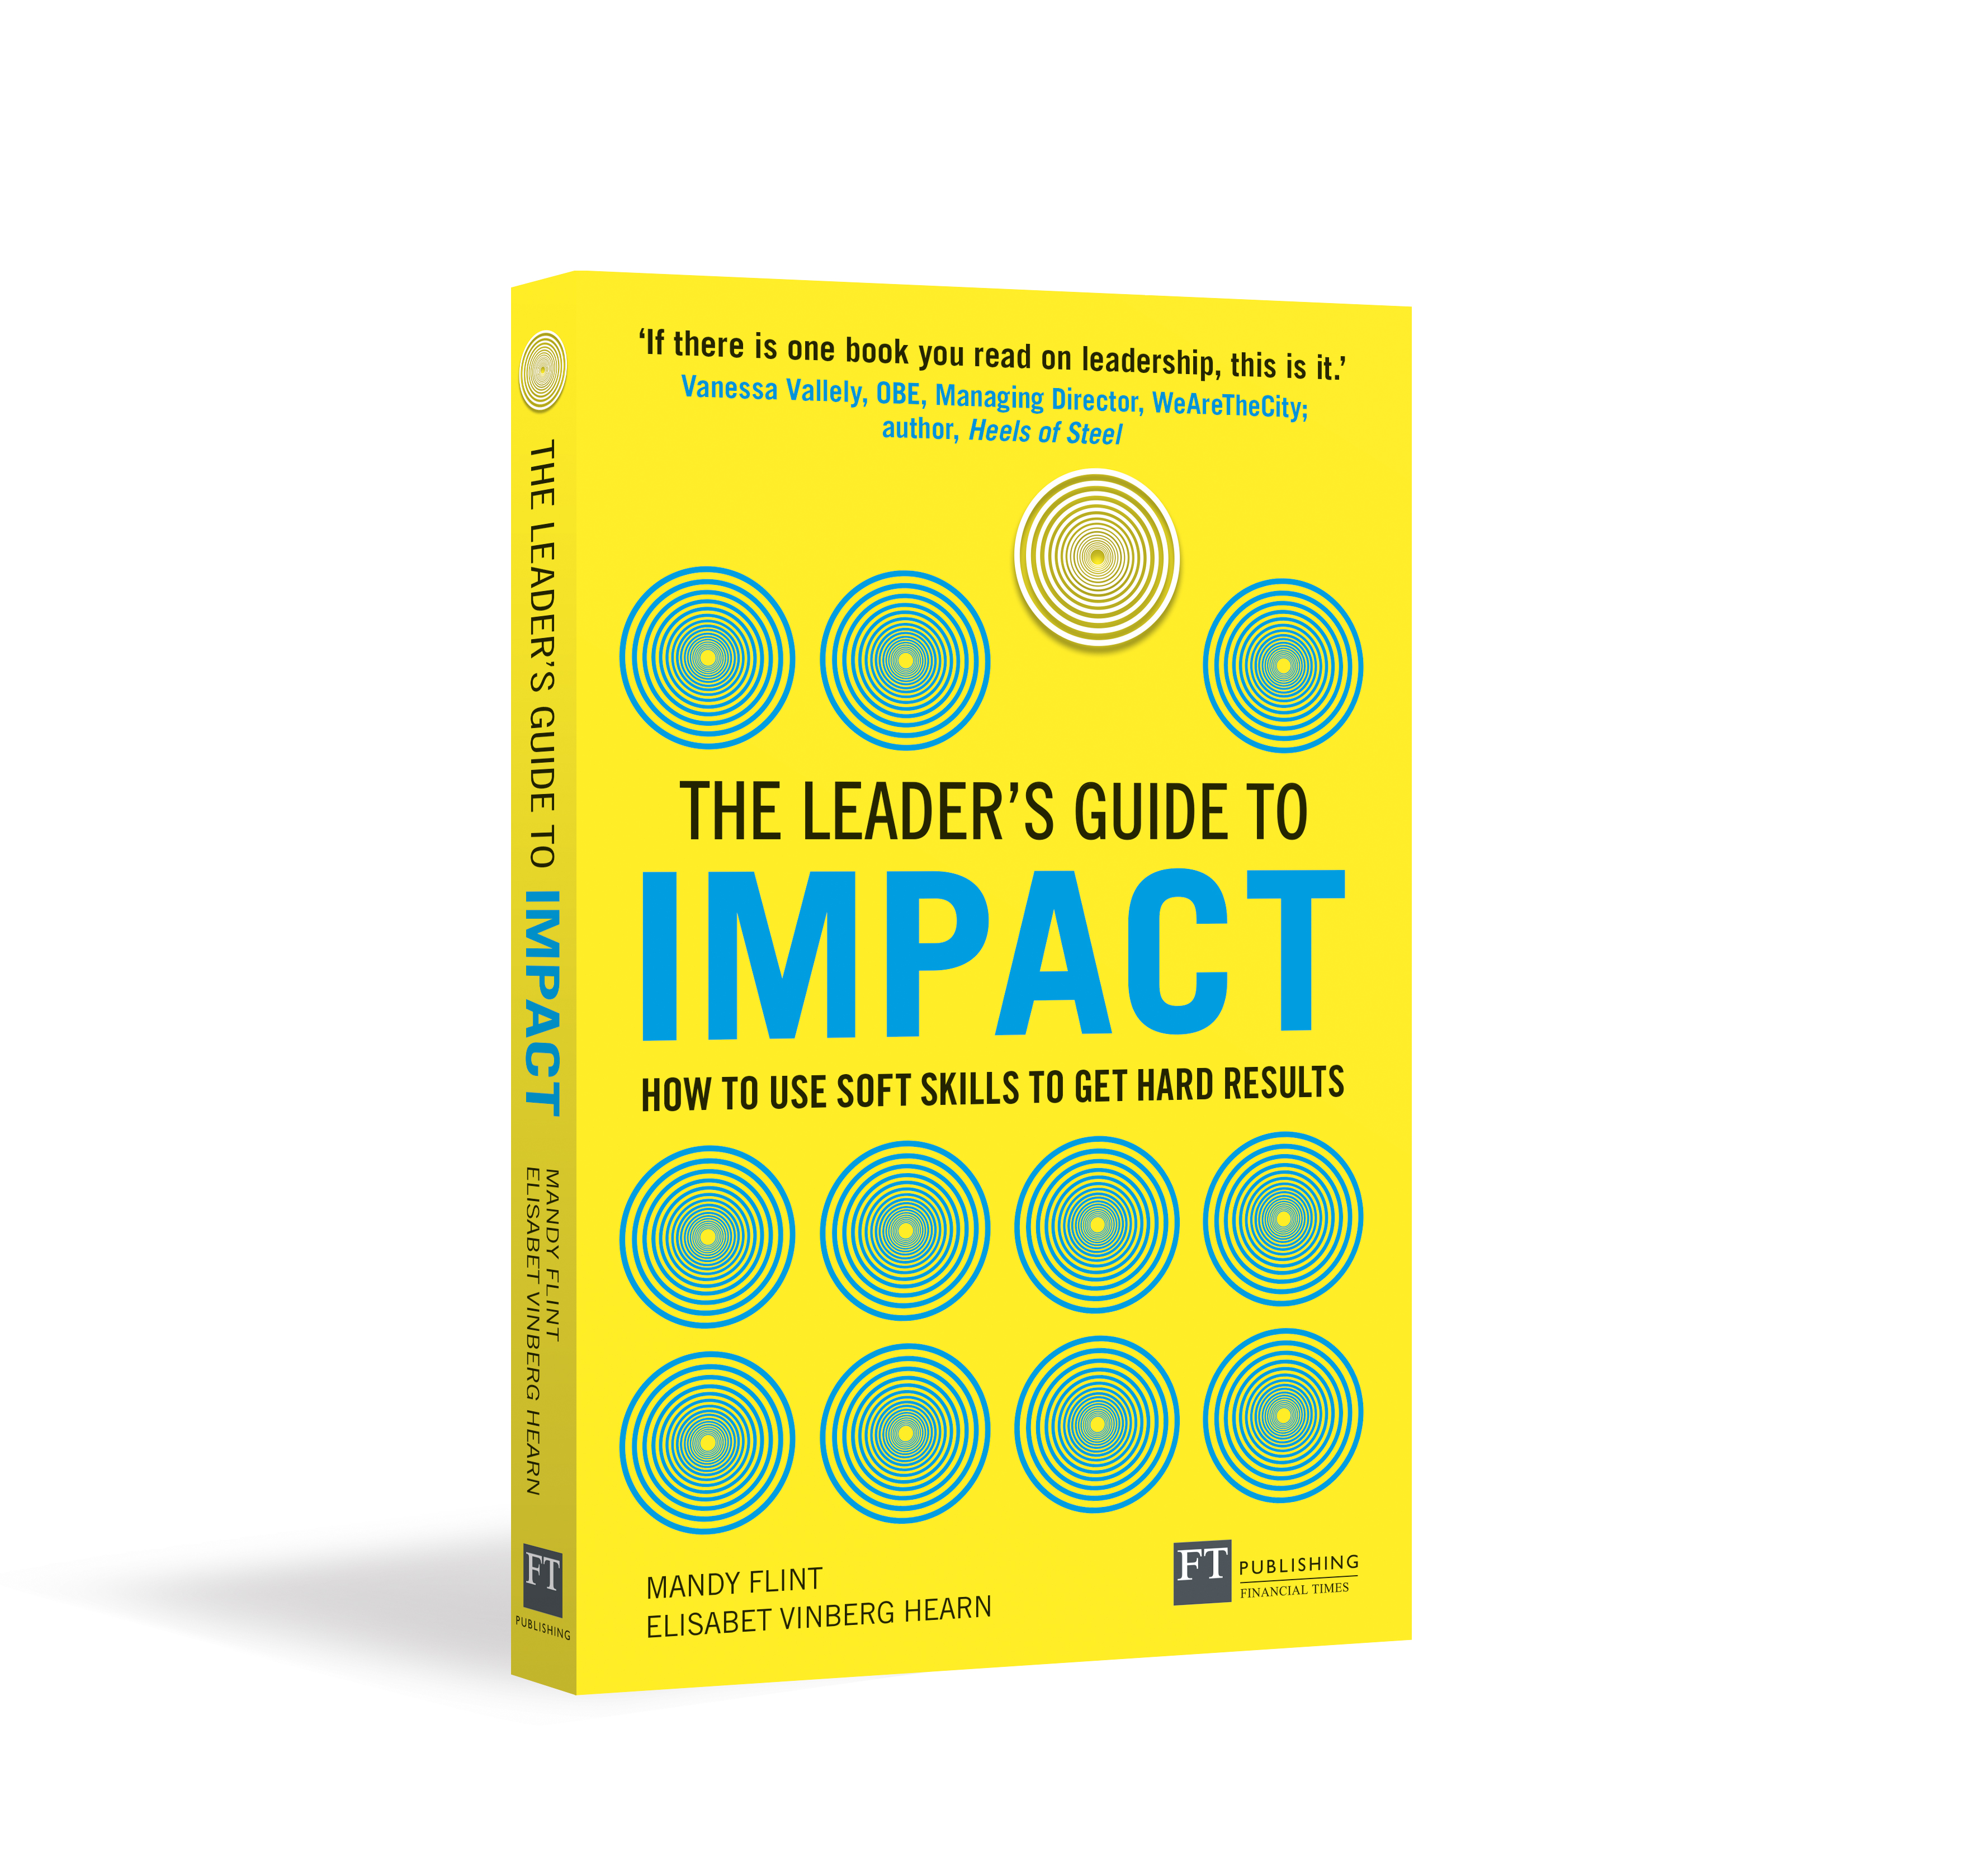 The Leader's Guide to Impact by Mandy Flint & Elisabet Vinberg Hearn Offers A Powerful Framework on How To Take Control Of One's Impact As A Leader